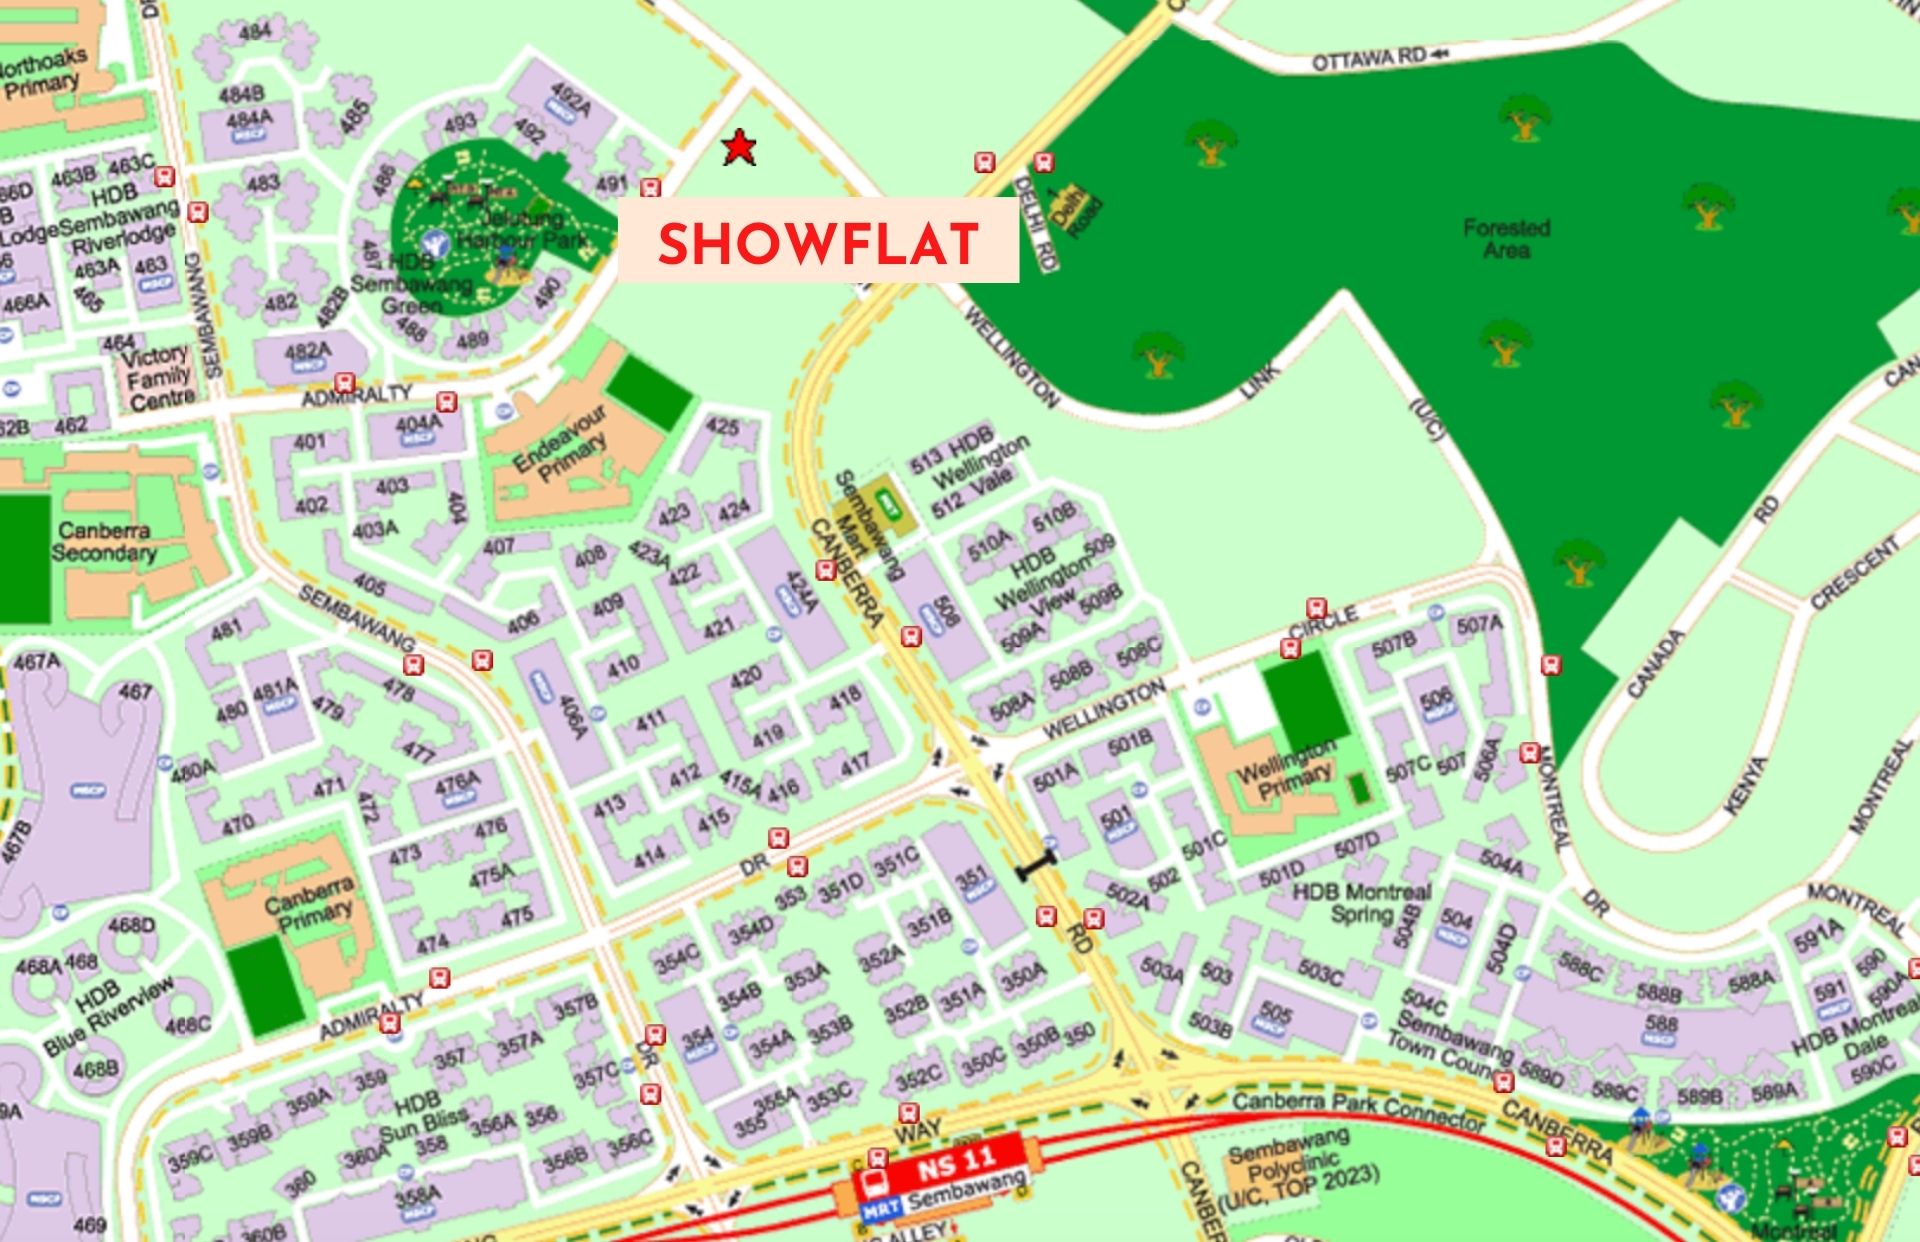 Provence Residence Showflat Location